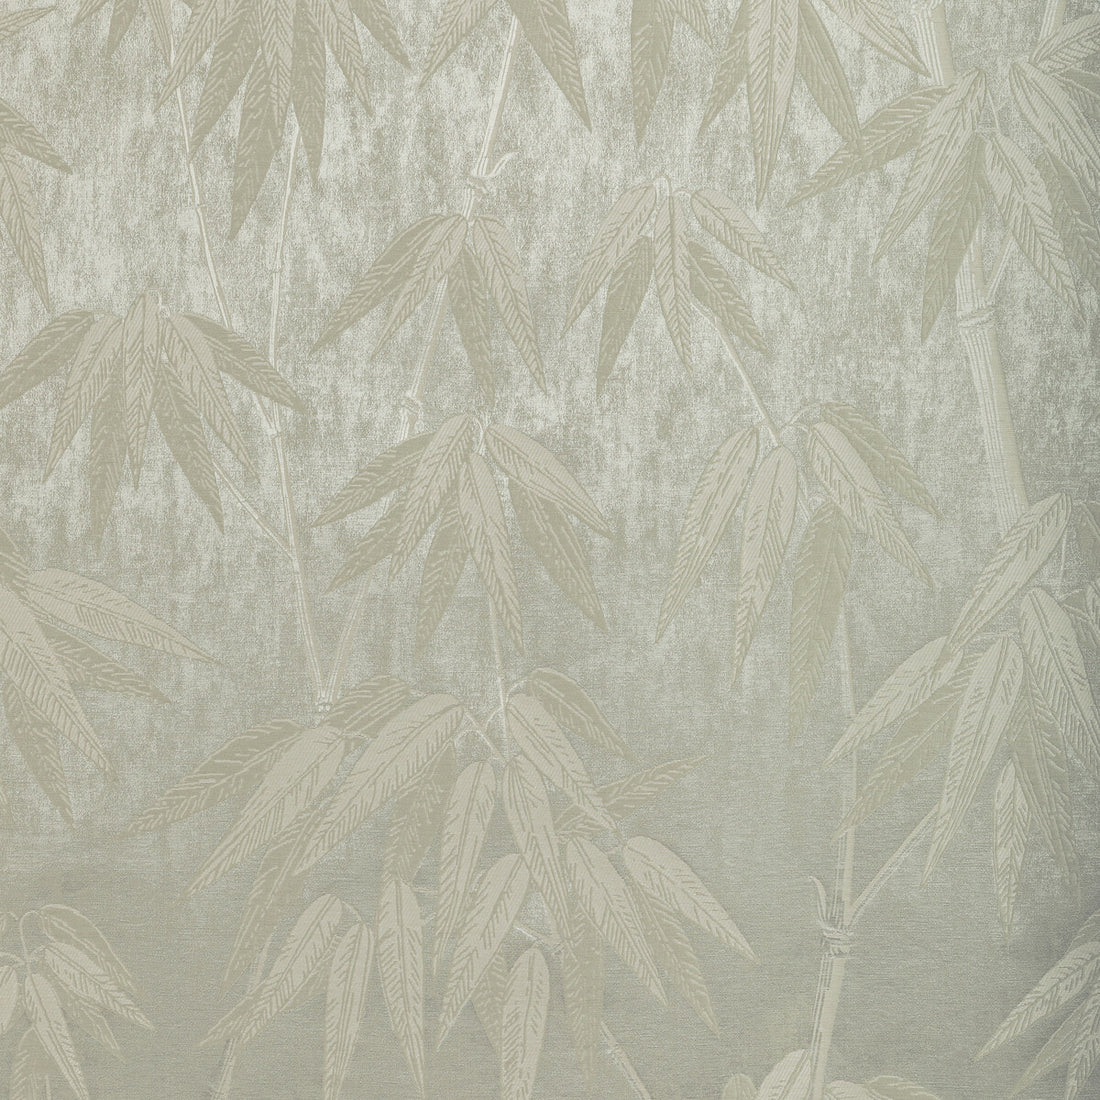 Bamboo Chic fabric in pewter color - pattern 4958.11.0 - by Kravet Couture in the Modern Luxe Silk Luster collection